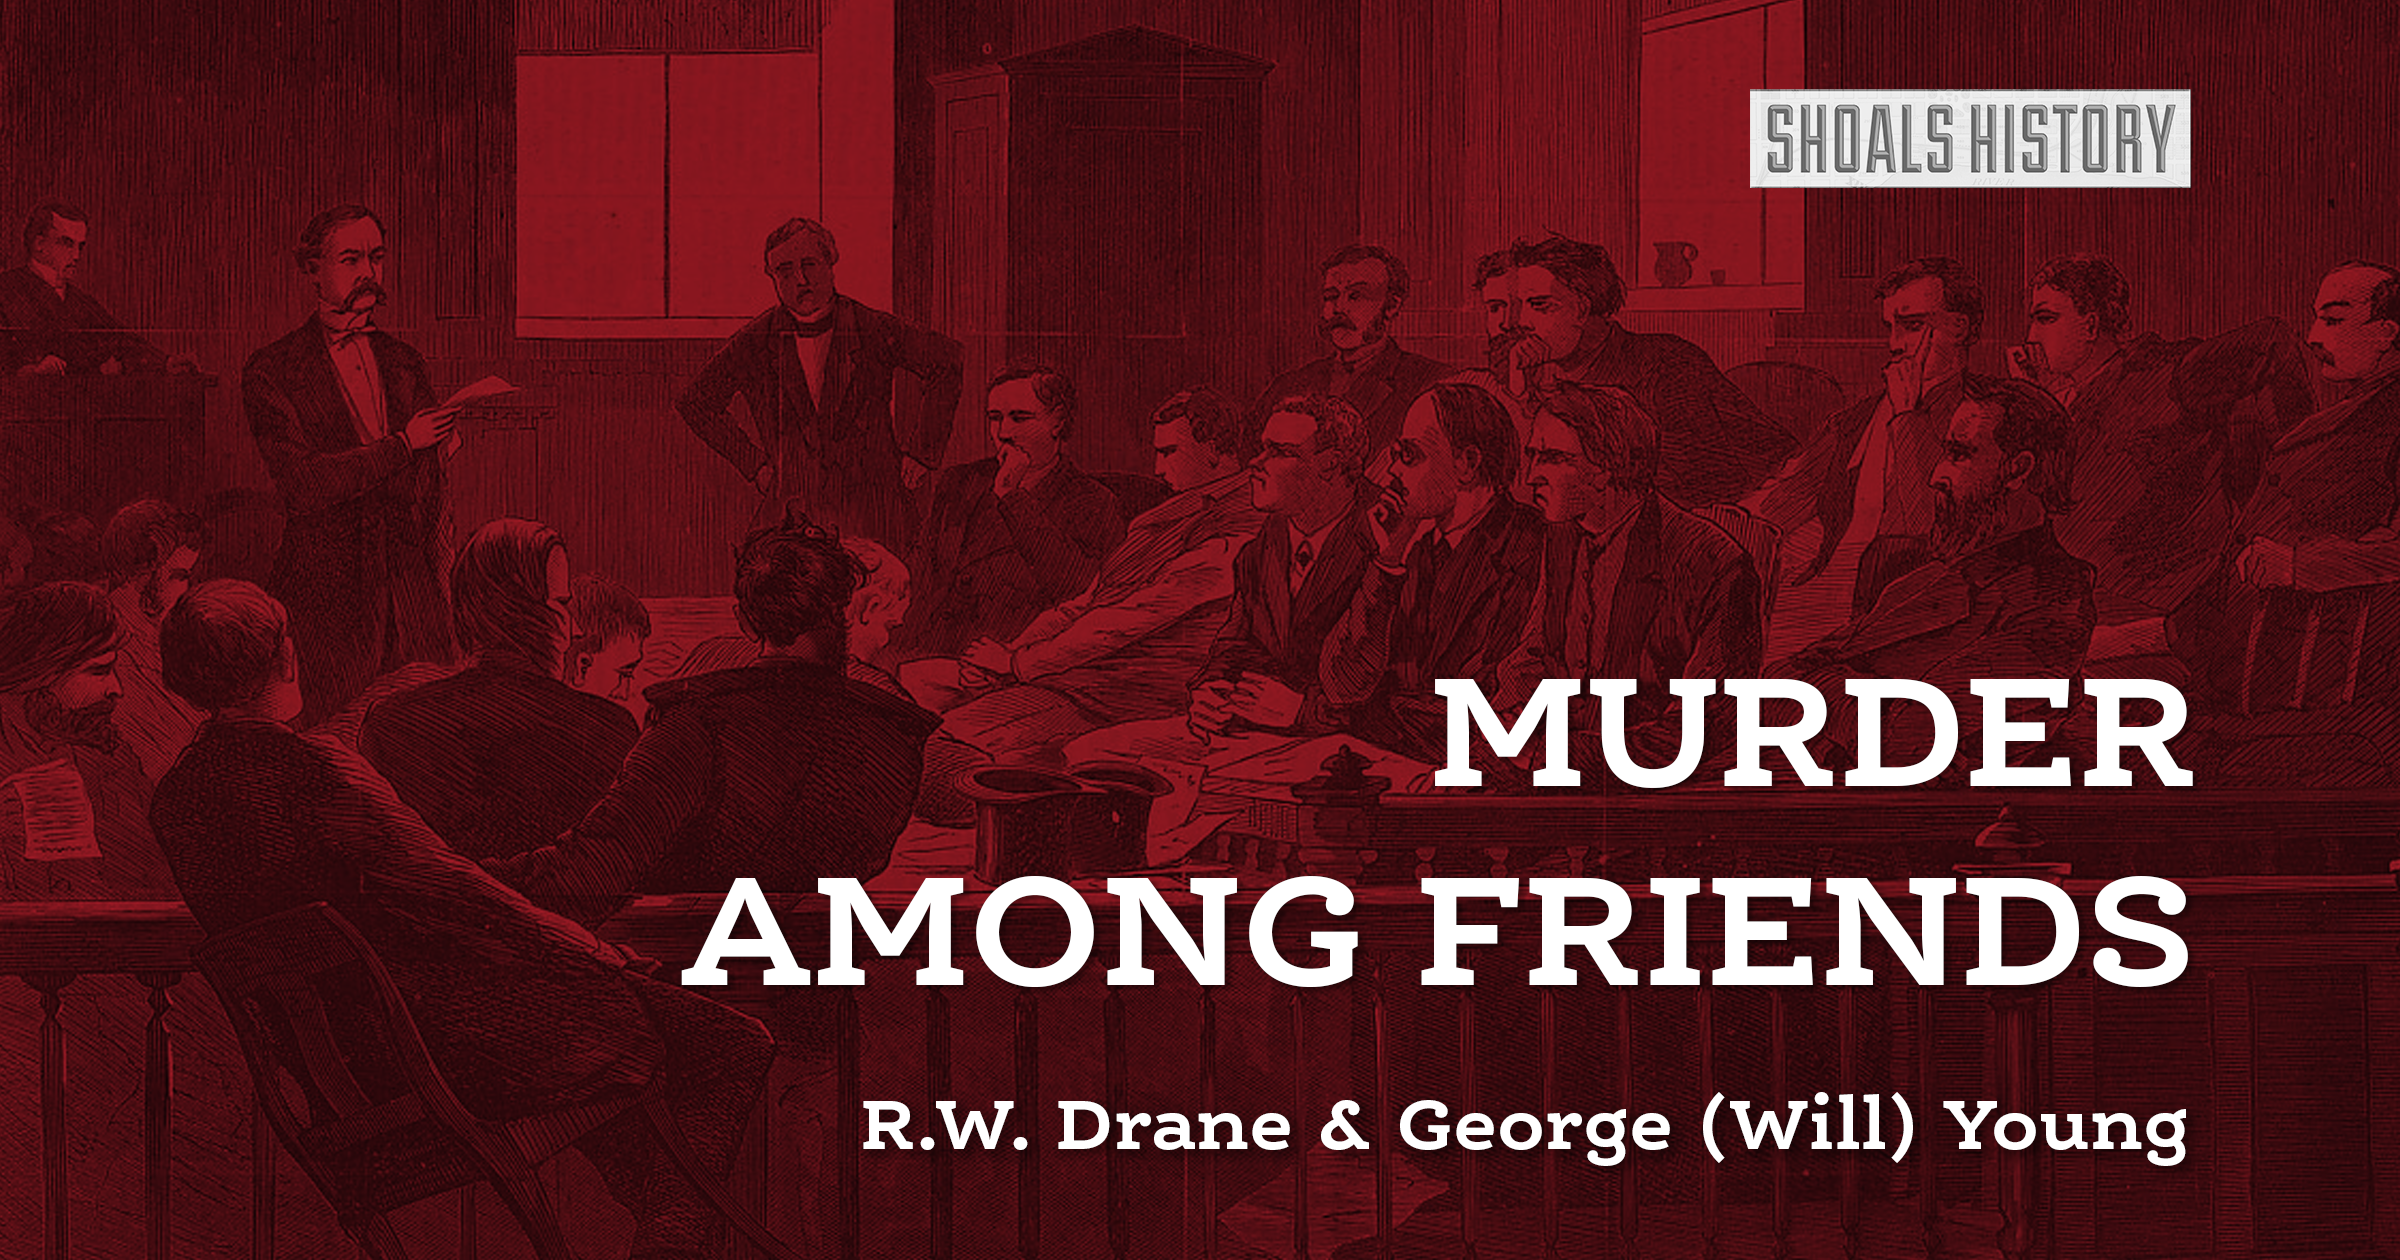 R.W. Drane & George Will Young - Murder Among Friends